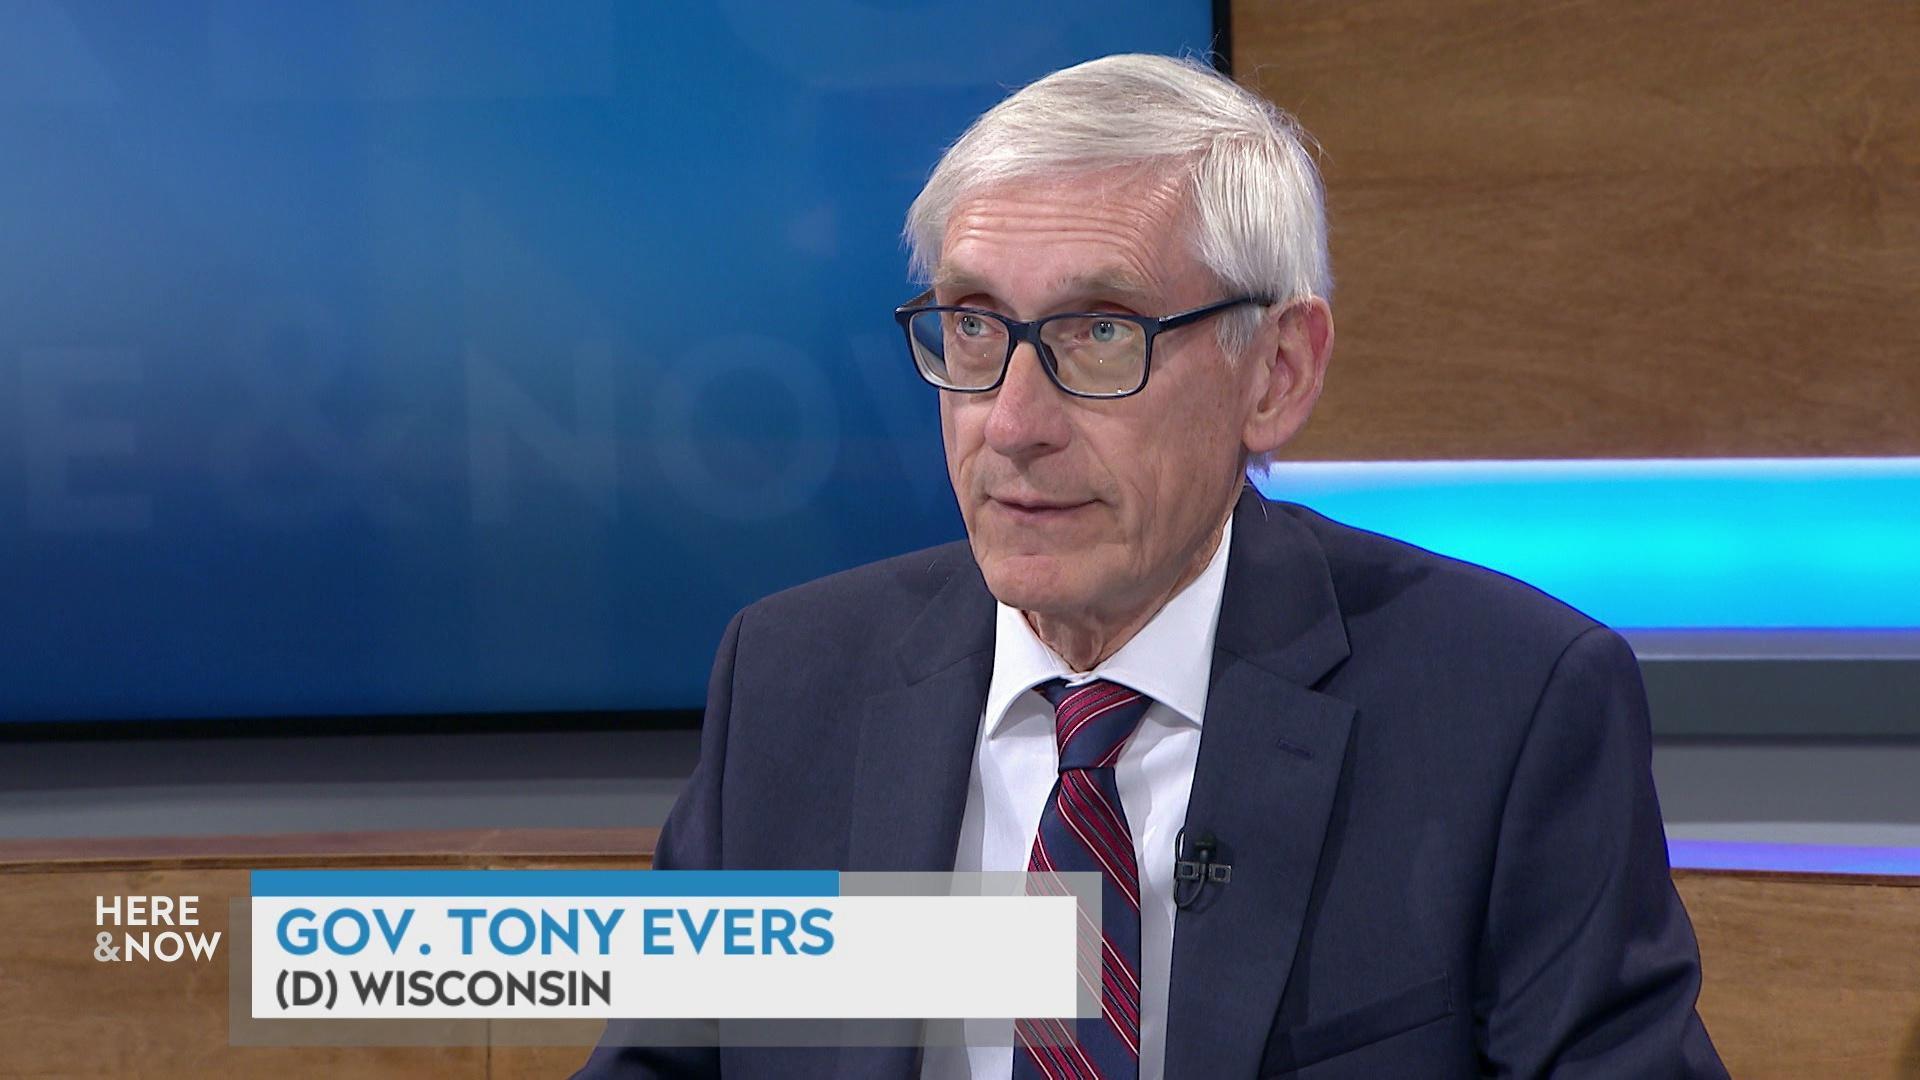 Gov. Tony Evers on his second-term agenda for Wisconsin